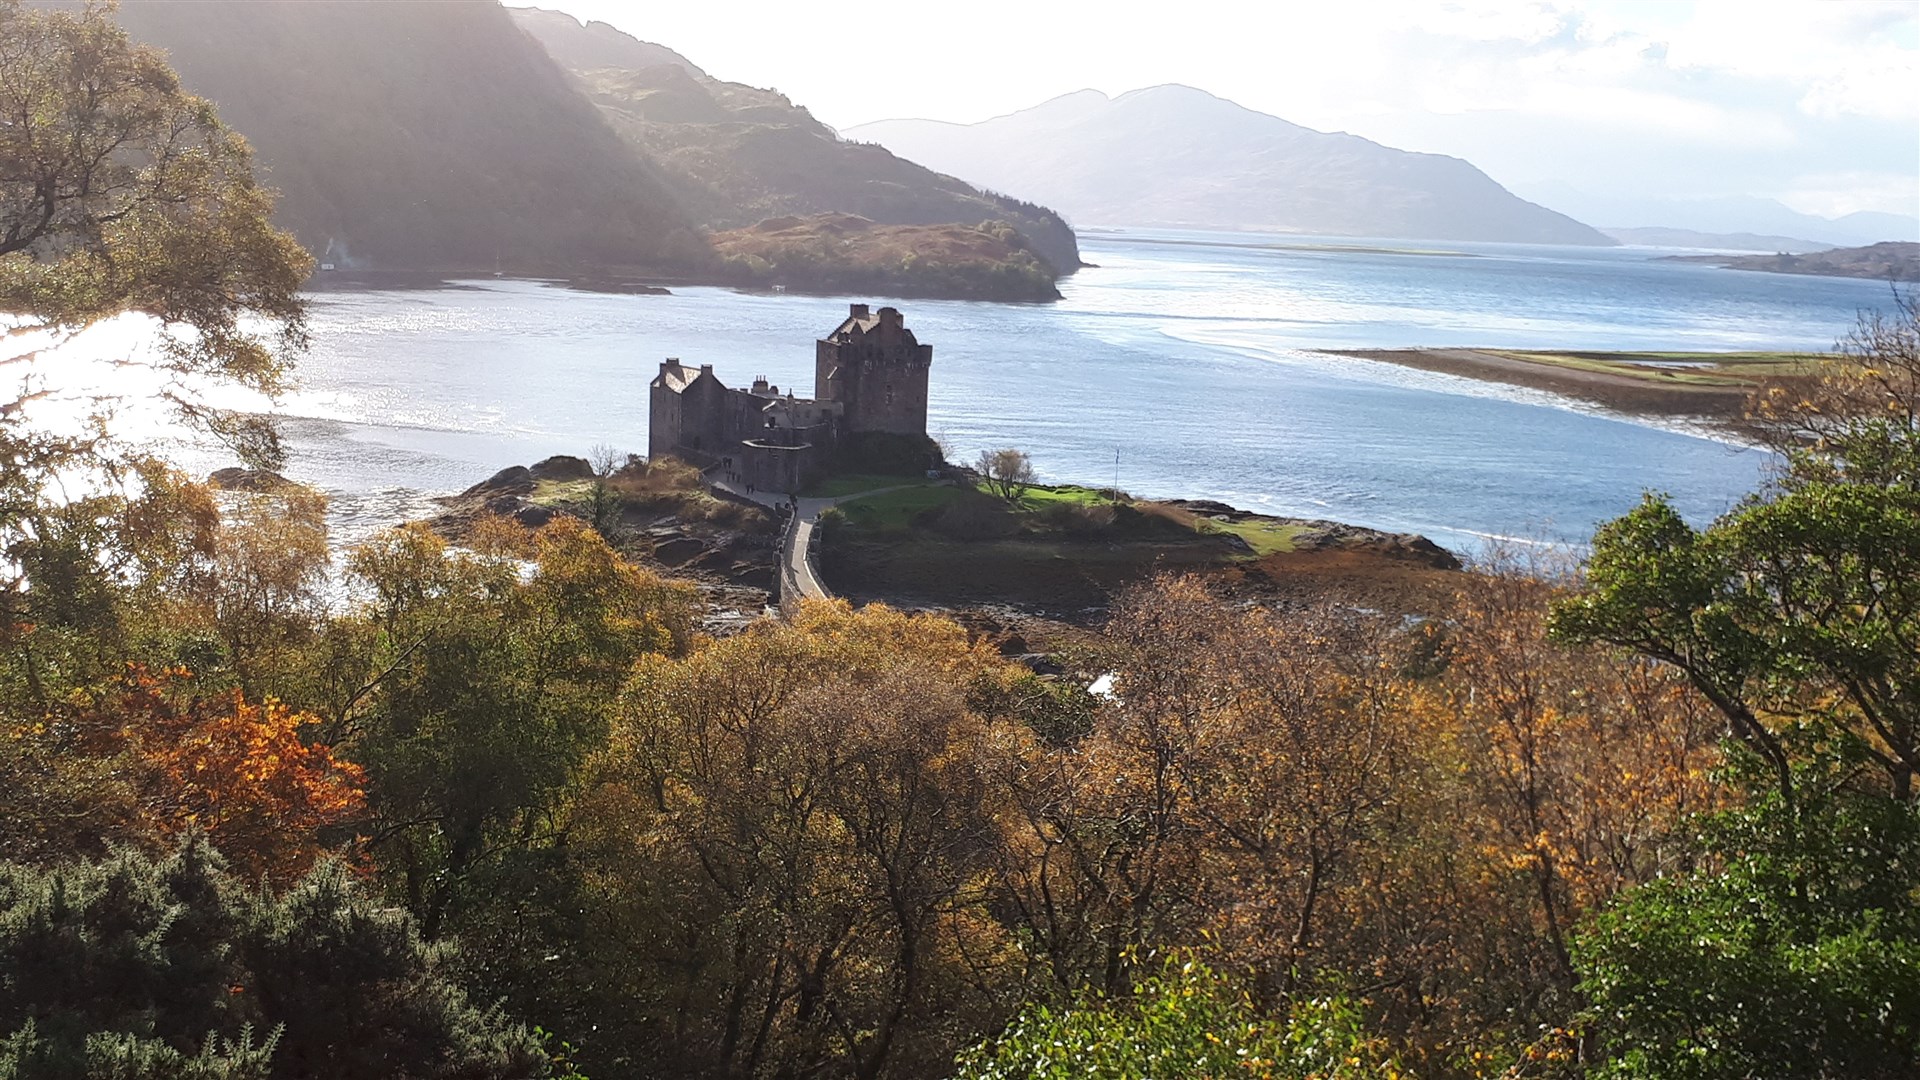 Eilean Donan Castle at Dornie is amongst many glittering jewels attracting people to the Highlands. But concerns persist over the behaviour of a small minority of visitors. Picture: Hector Mackenzie